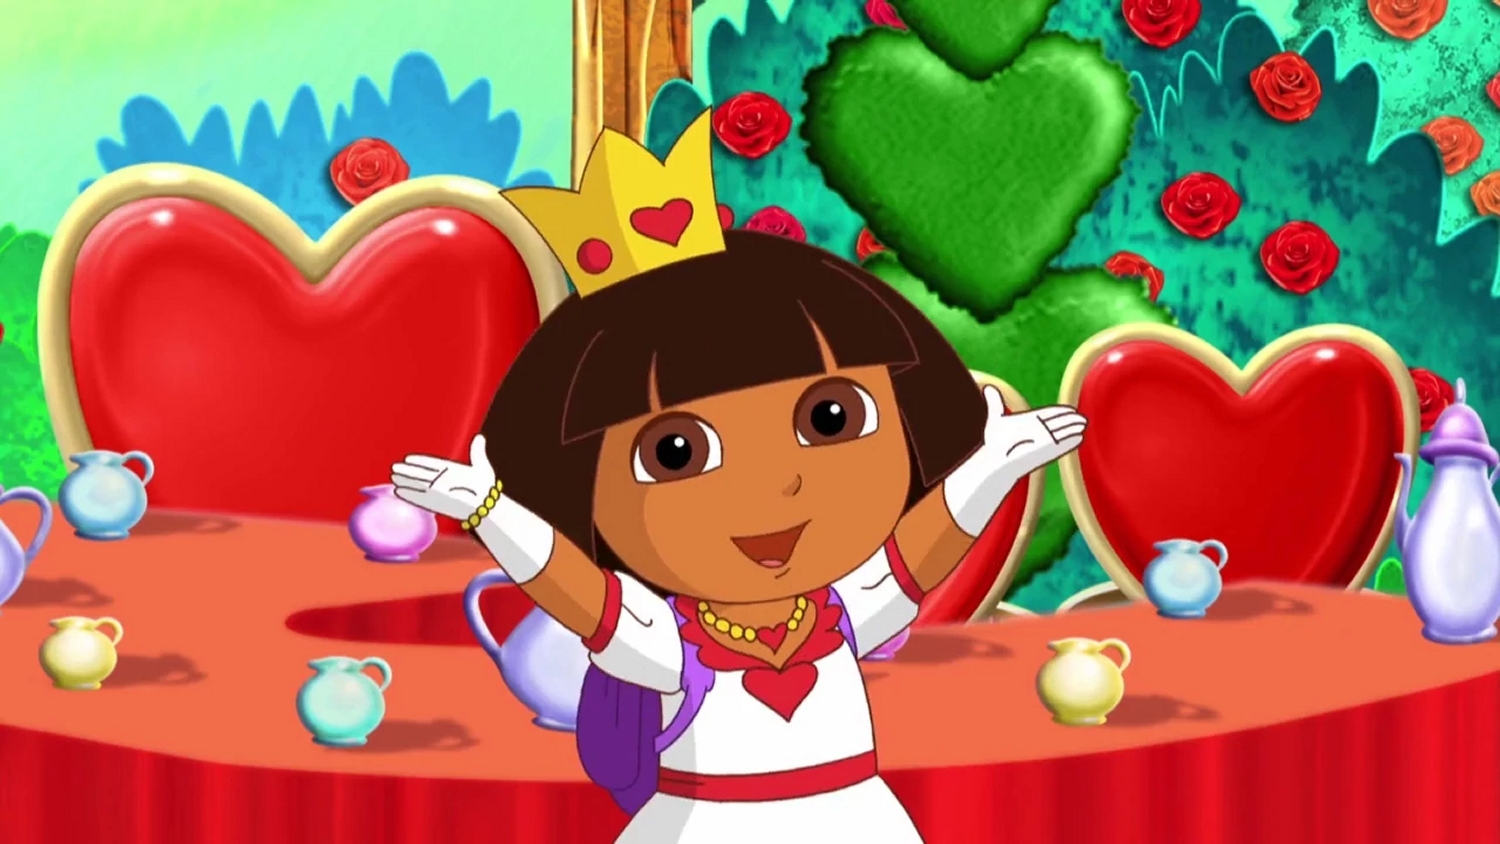 Michael Bay is overseeing a Dora The Explorer movie - The Dark Carnival.